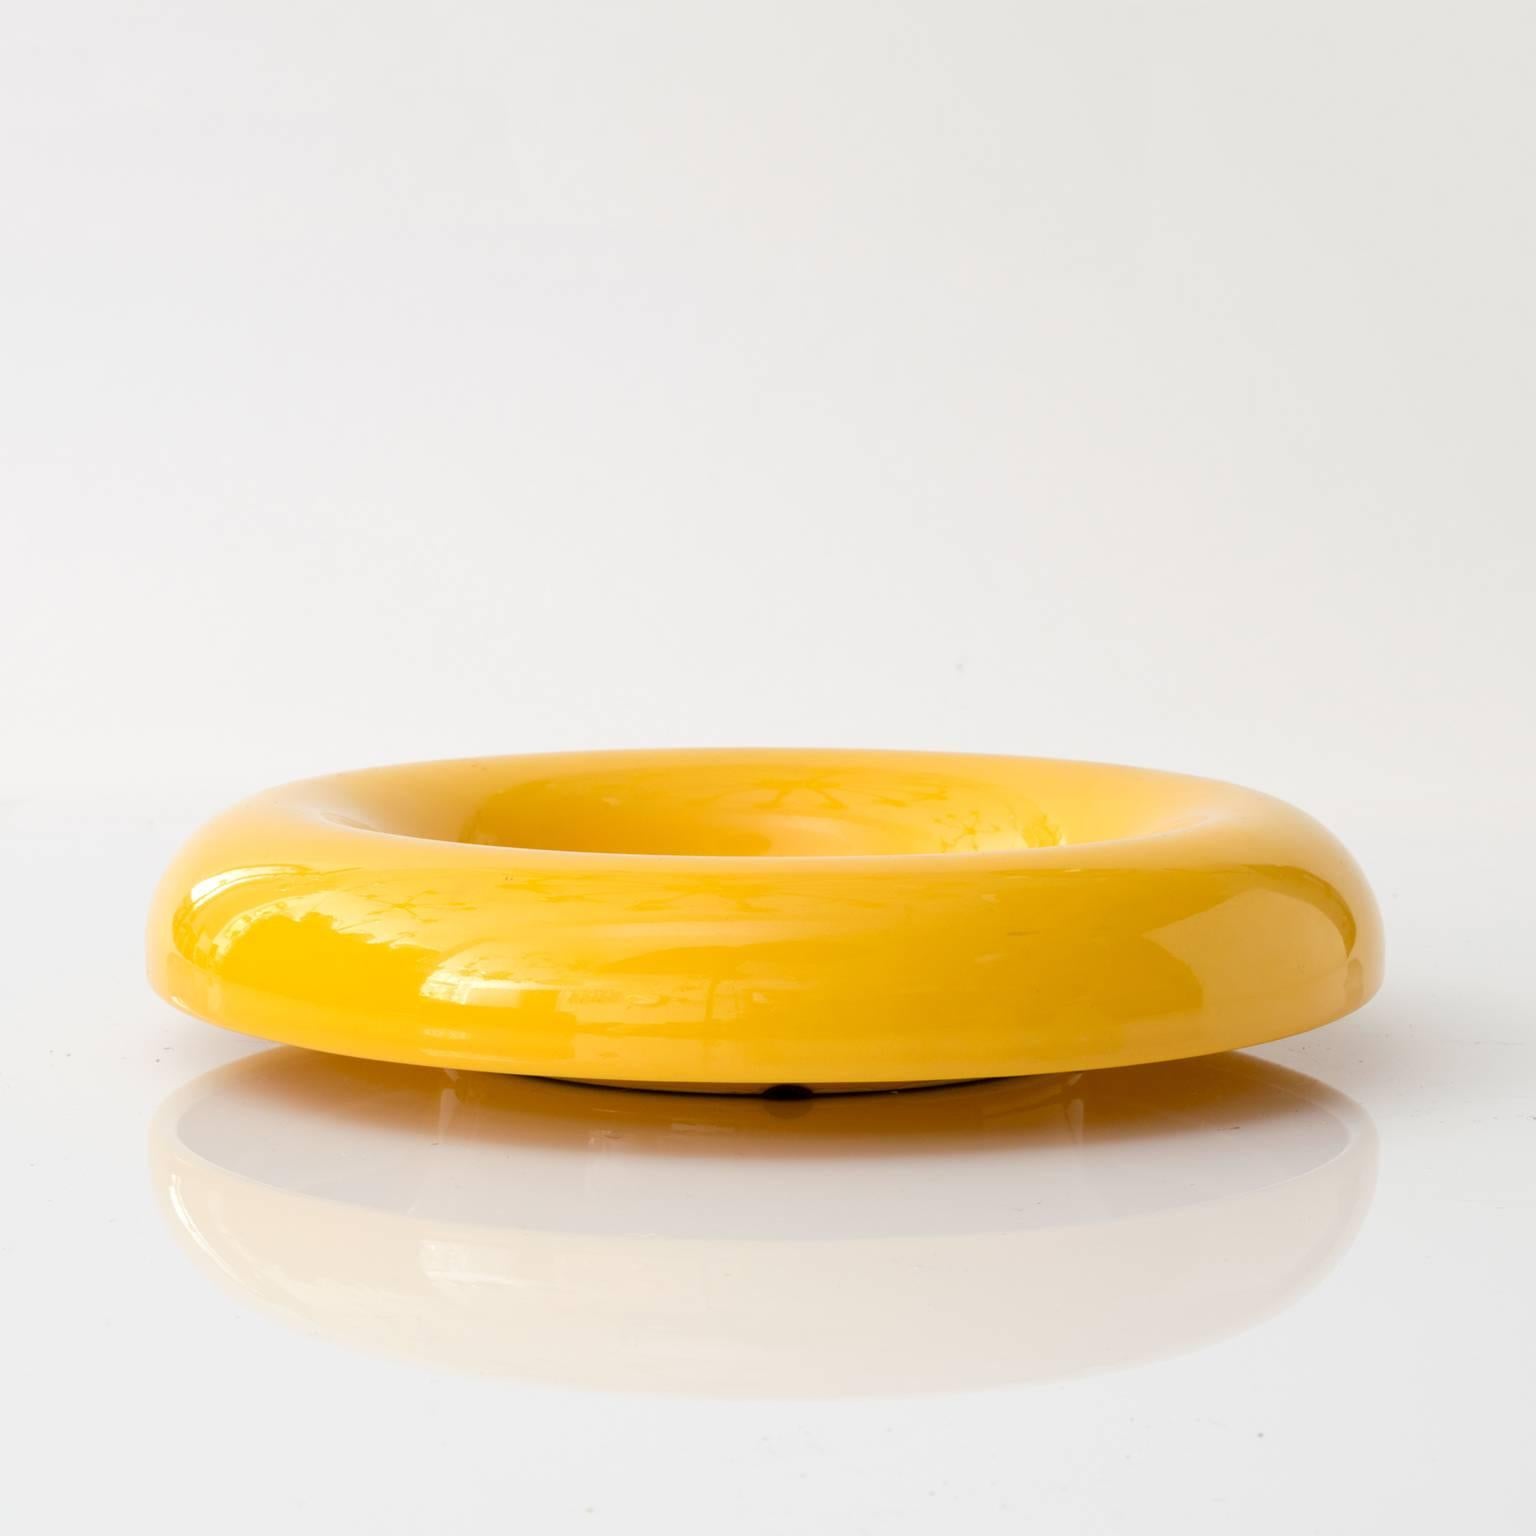 Italian Mid-Century Modern glazed ceramic bowl in vibrant yellow made by Sciart, Italy, circa late 1960s.
 
Measures: H 2